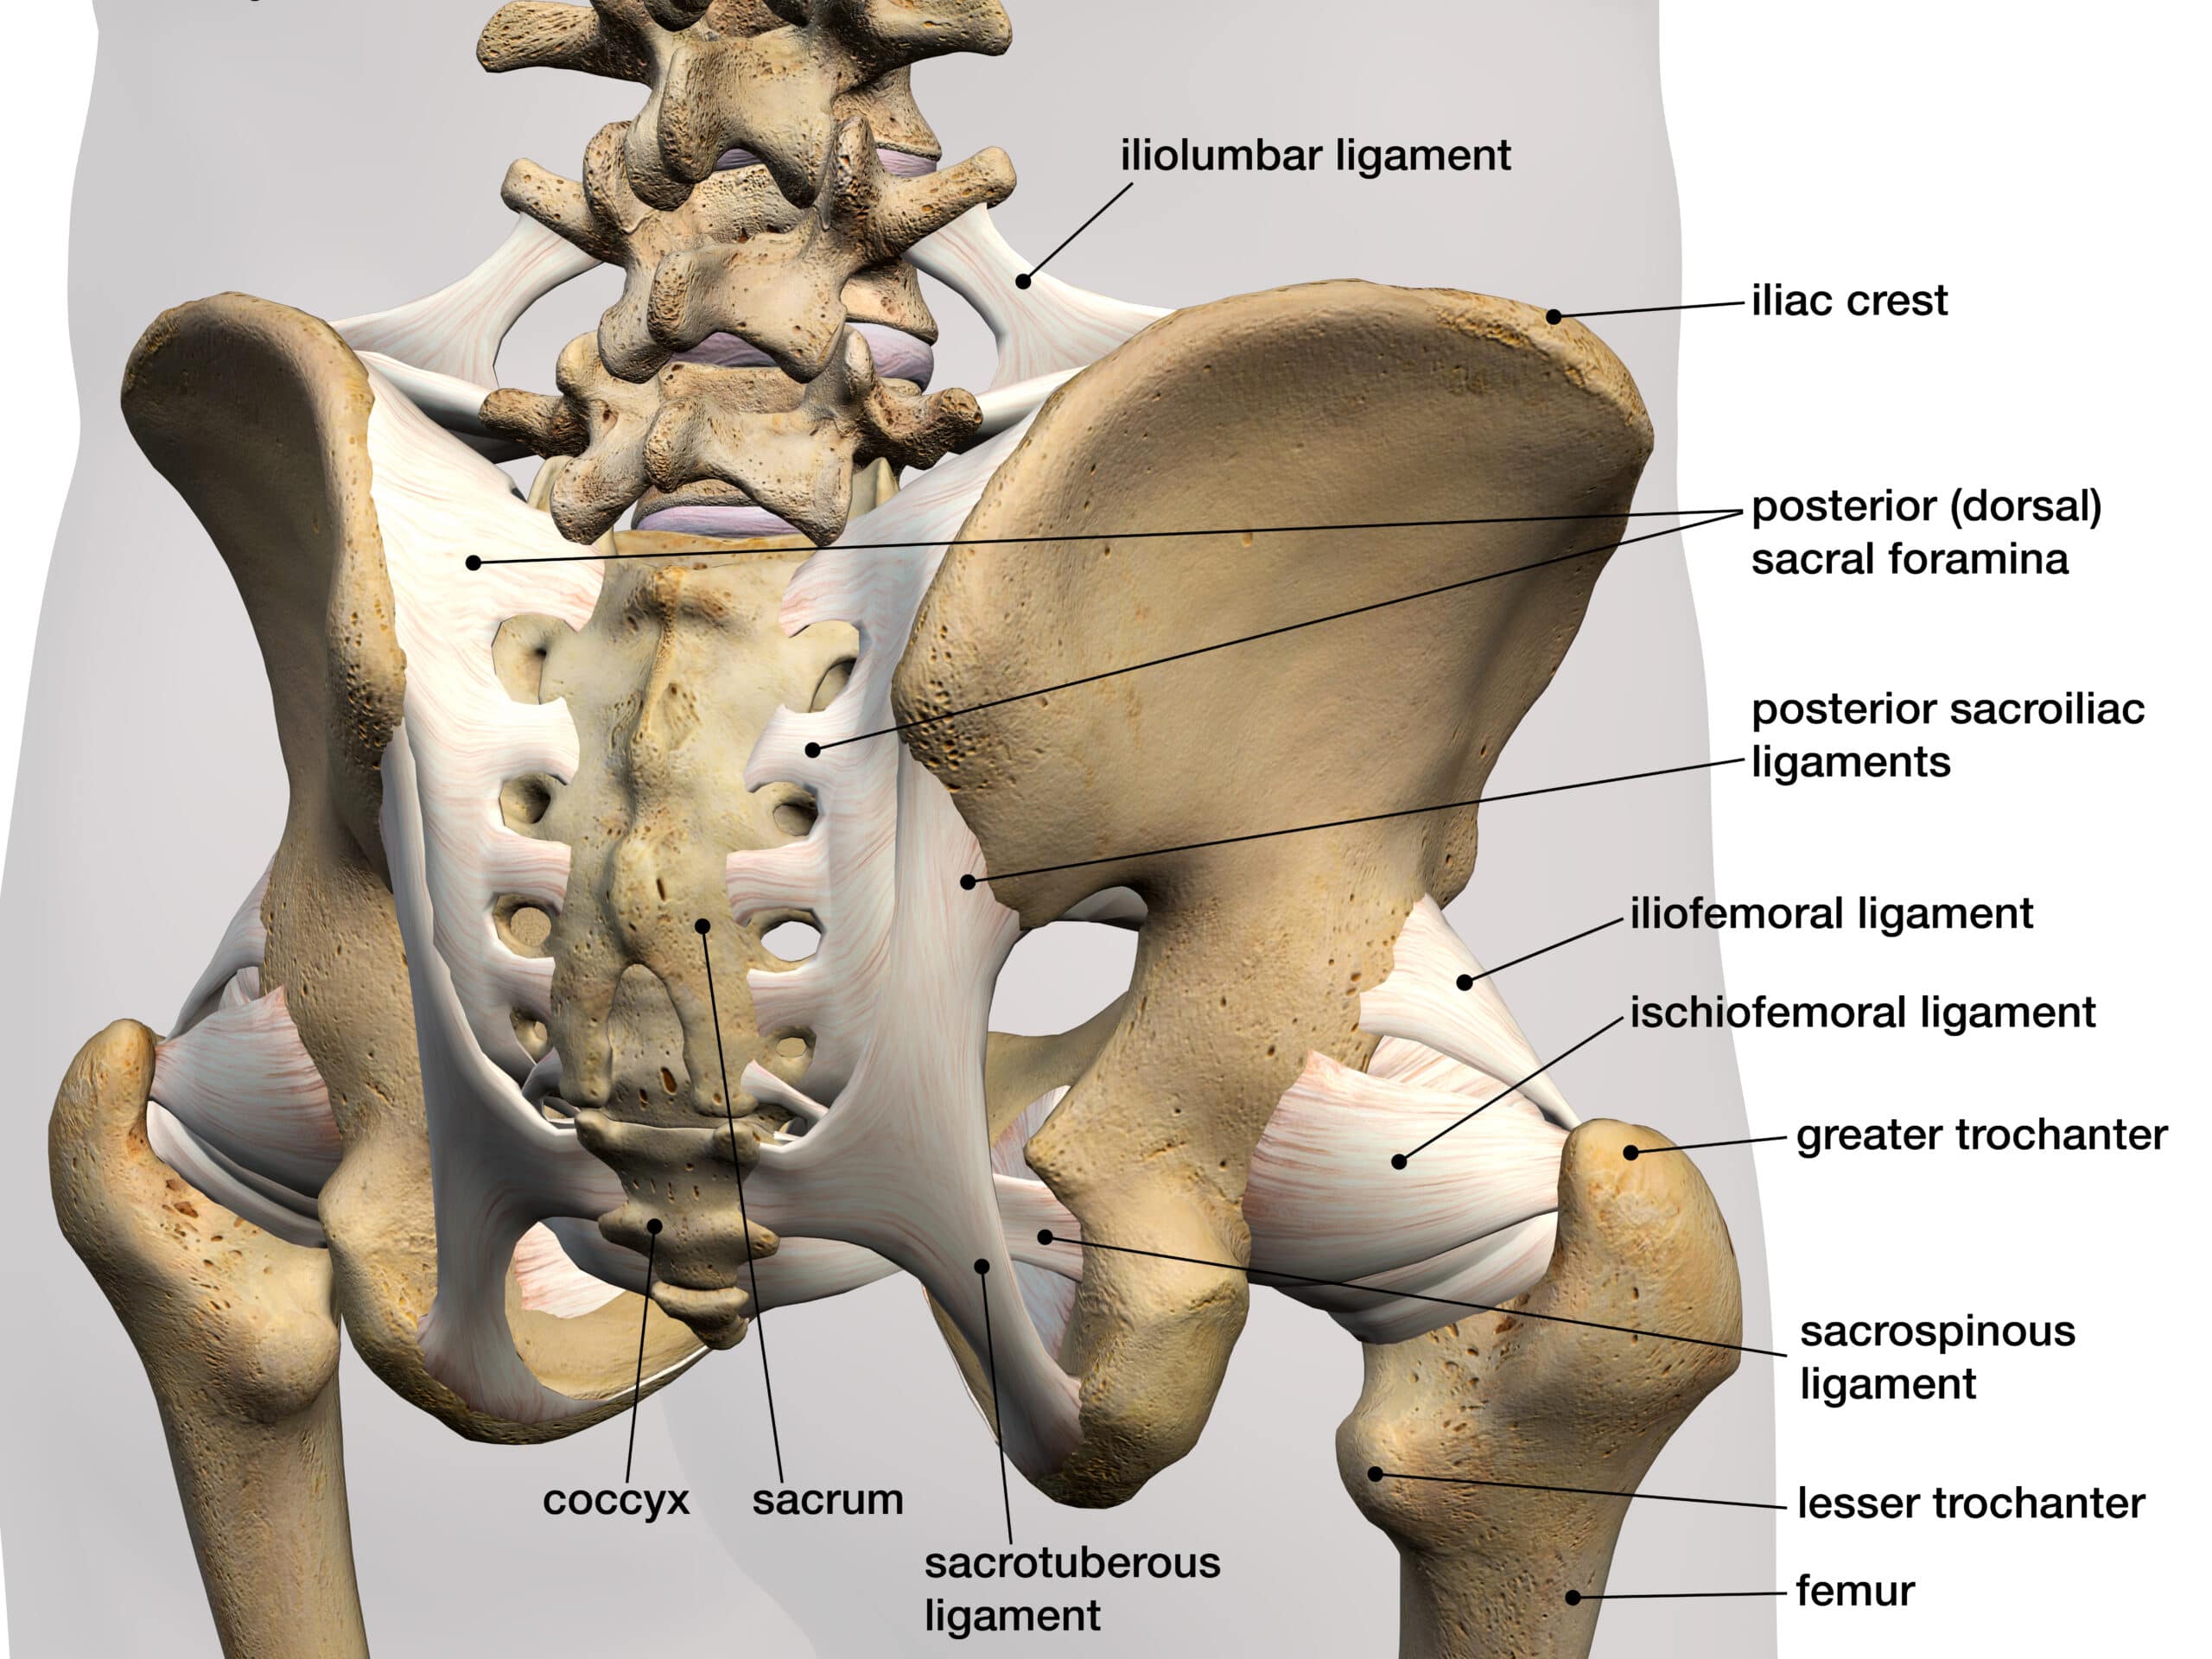 Complex Fracture Of The Pelvis: Do You Need An Orthopedic Surgeon? - Heiden  Orthopedics